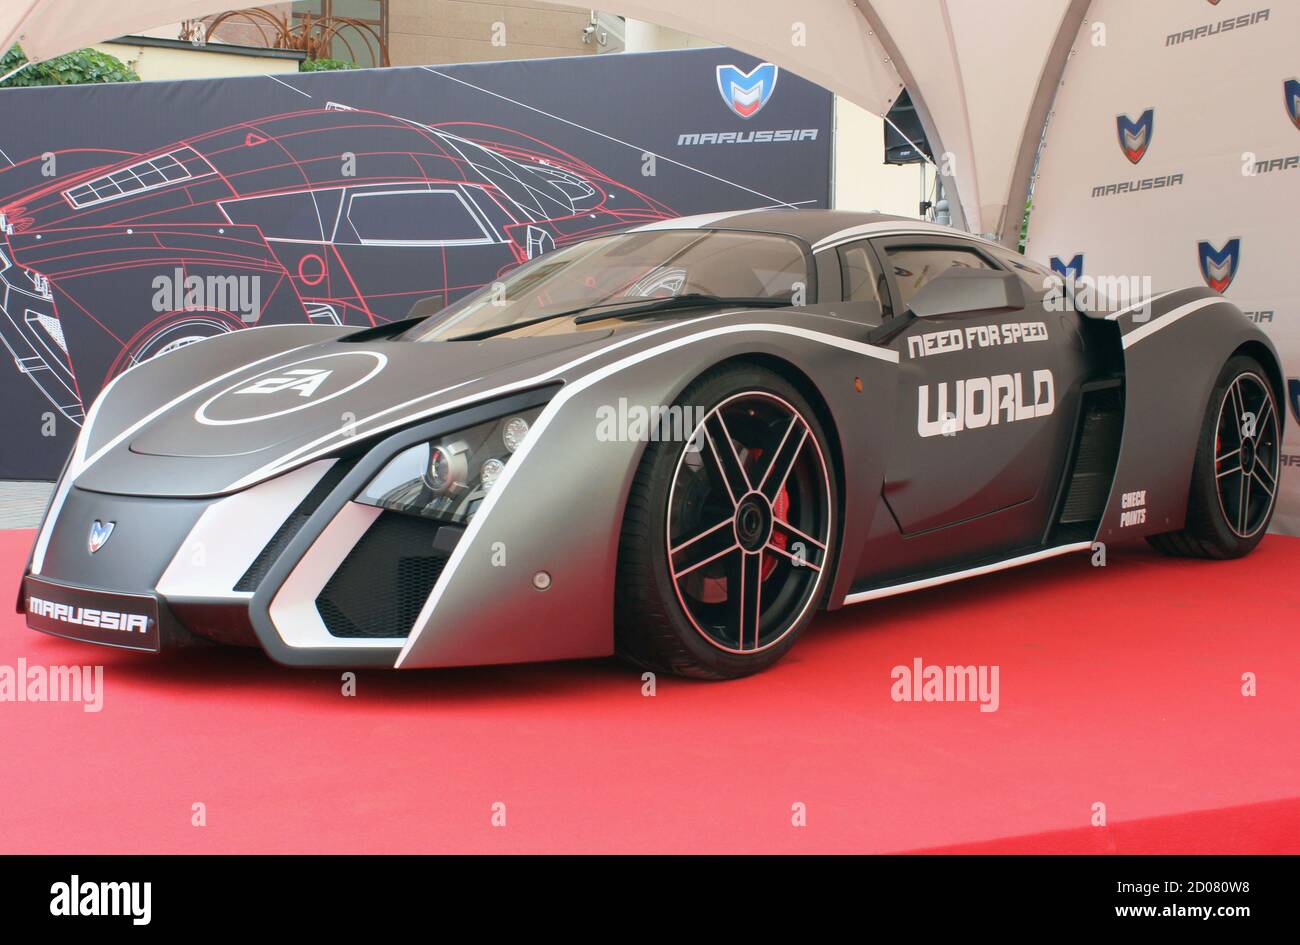 A Marussia B2 Sports Car Is Displayed During A Presentation In Moscow July 3 12 Marussia Motors Is The First Russian Manufacturer Of Premium Class Vehicles Reuters Yana Soboleva Russia s Transport